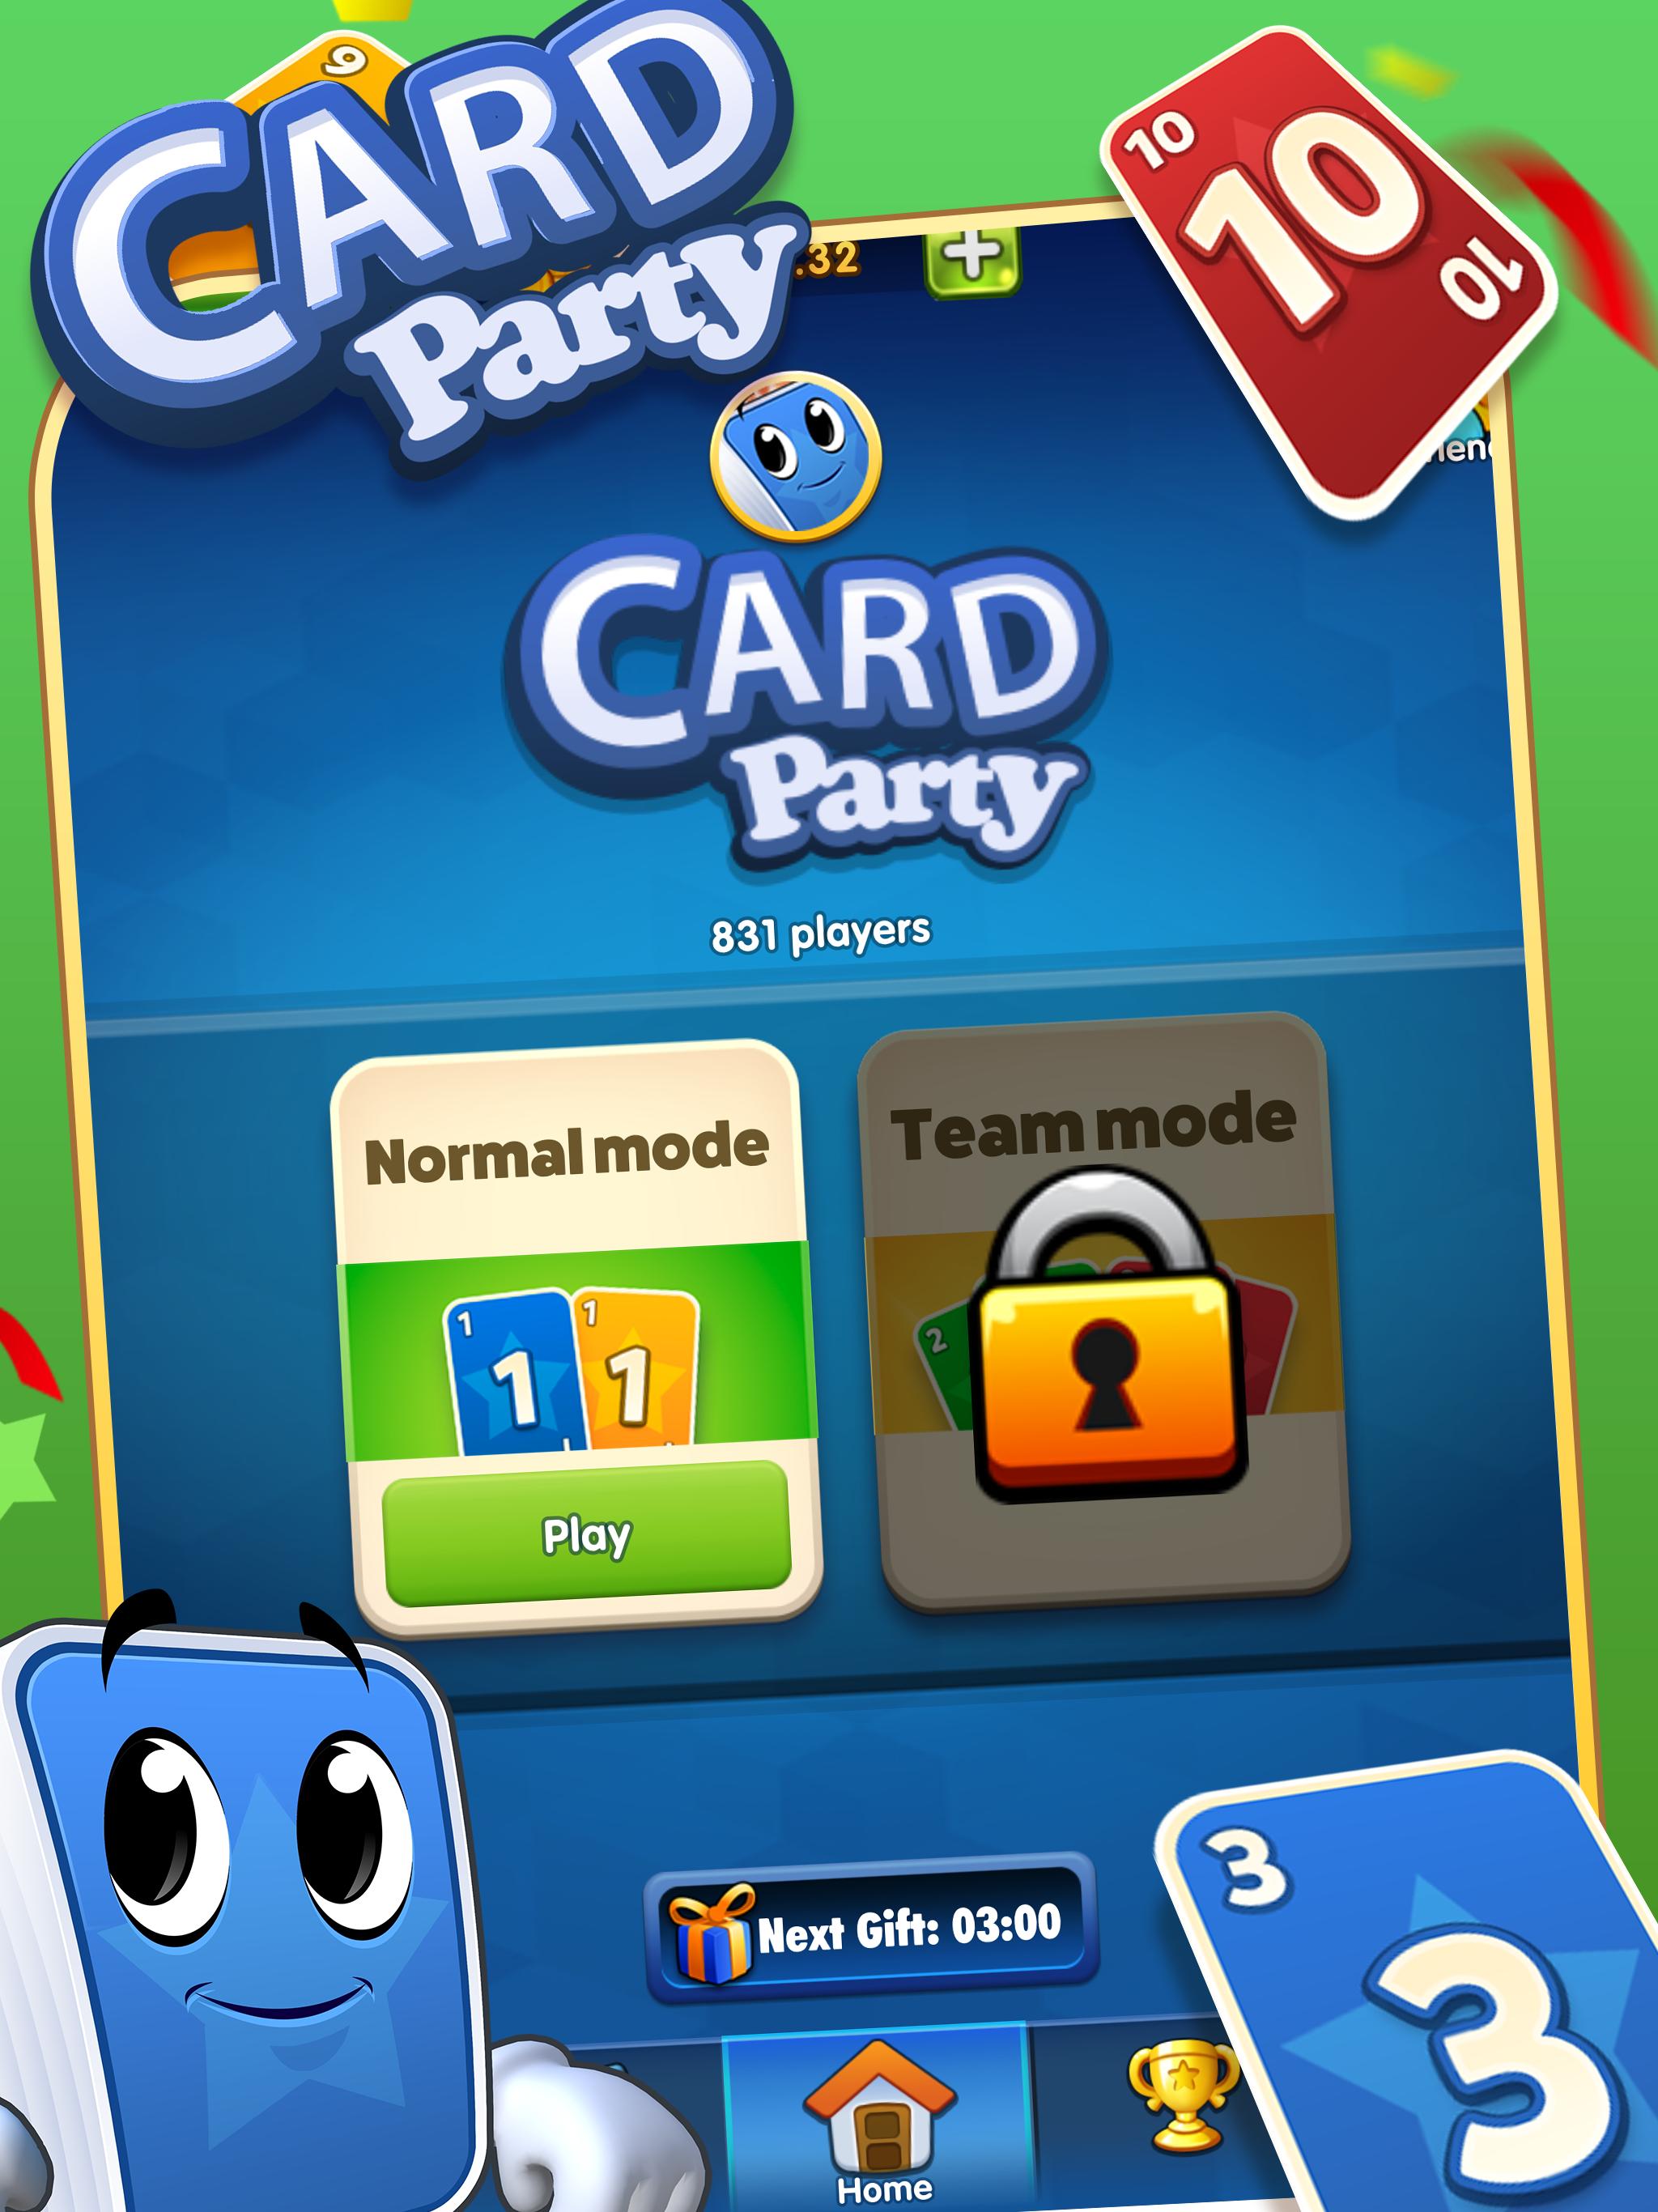 GamePoint CardParty 24357 Screenshot 1